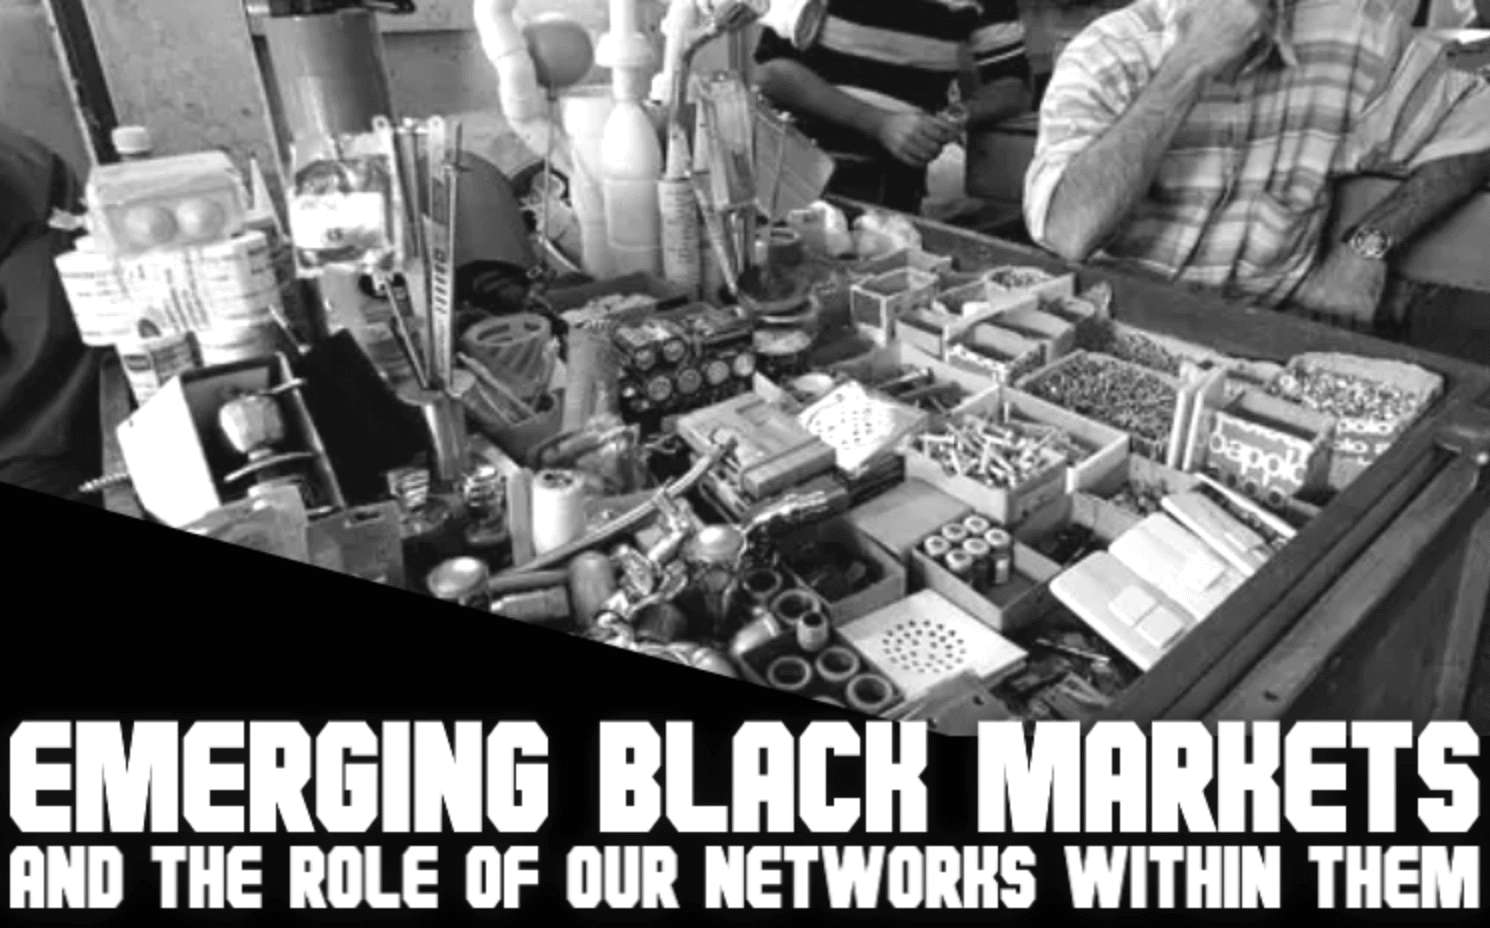 American Futurist Publishes Turn Key Cell Strategy Instructional Advice "Emerging Black Markets and the Role of Our Networks Within Them / Chaos is a ladder"